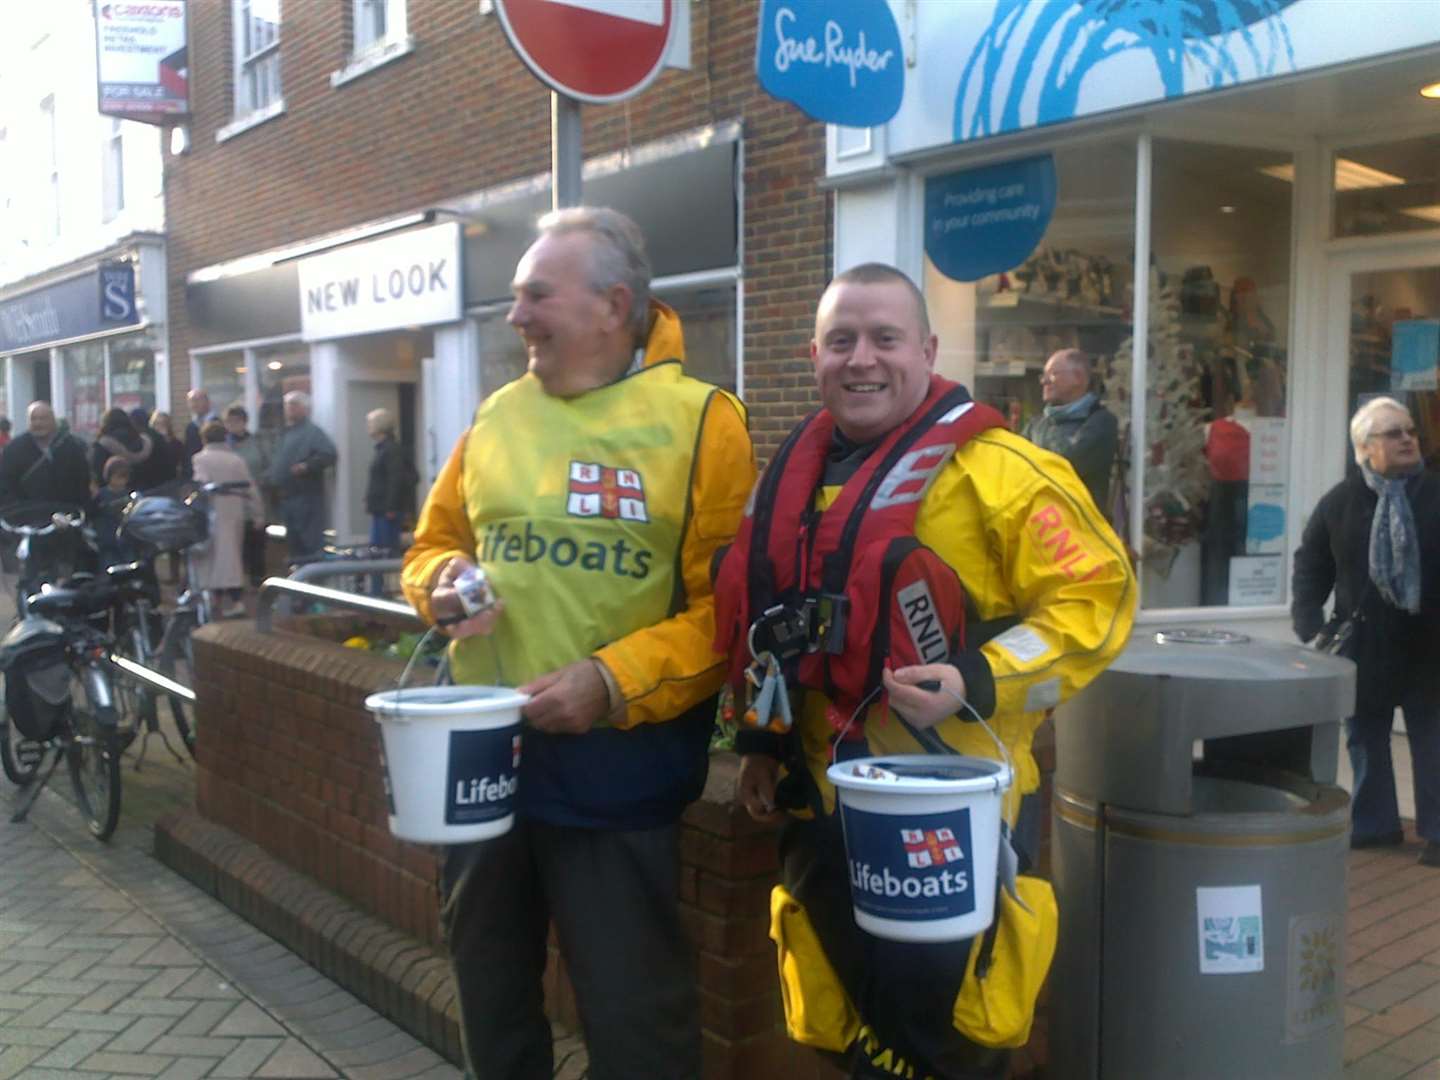 Doorstep cllections will be stopped by the RNLI but volunteers will still be collecting in Deal High Street and in other ways